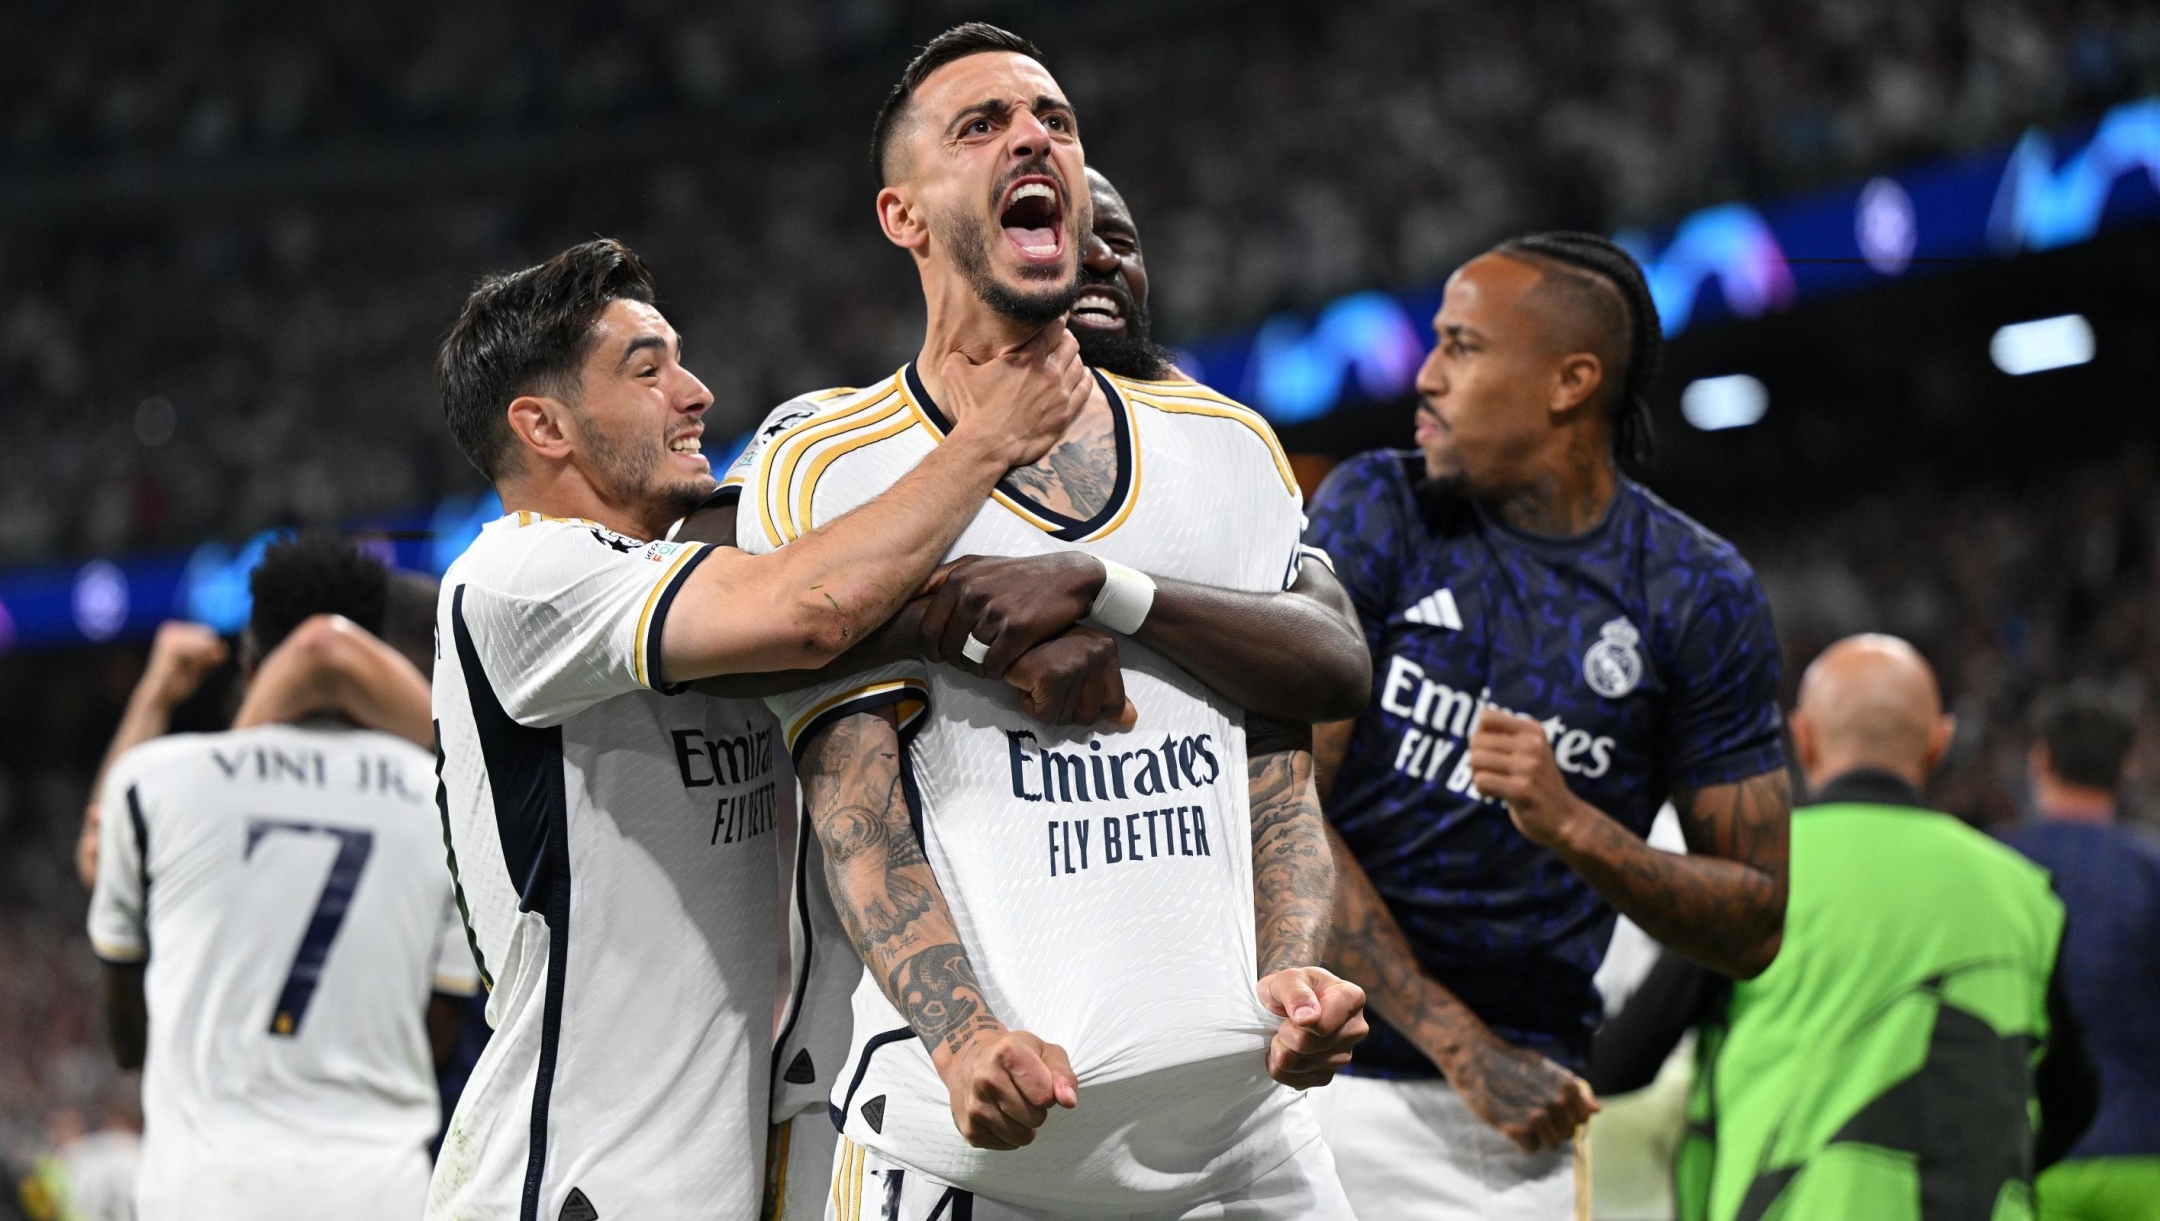 MADRID, SPAIN - MAY 08: Joselu of Real Madrid celebrates scoring his team's first goal during the UEFA Champions League semi-final second leg match between Real Madrid and FC Bayern München at Estadio Santiago Bernabeu on May 08, 2024 in Madrid, Spain. (Photo by David Ramos/Getty Images)